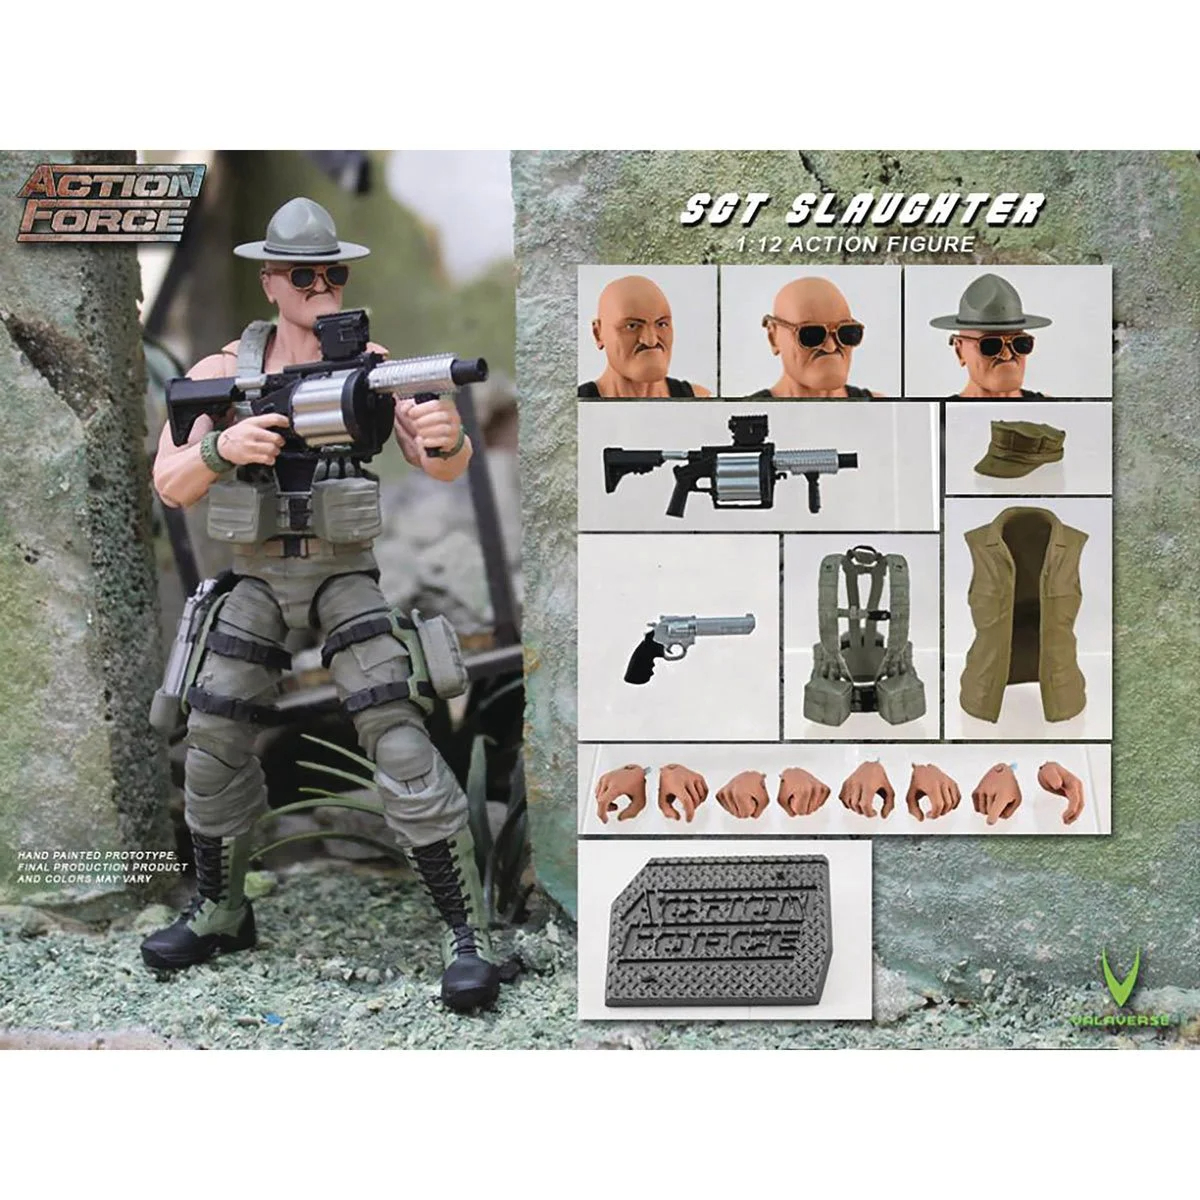 Action Force Series 2 Sgt. Slaughter 1:12 Scale Action Figure画像